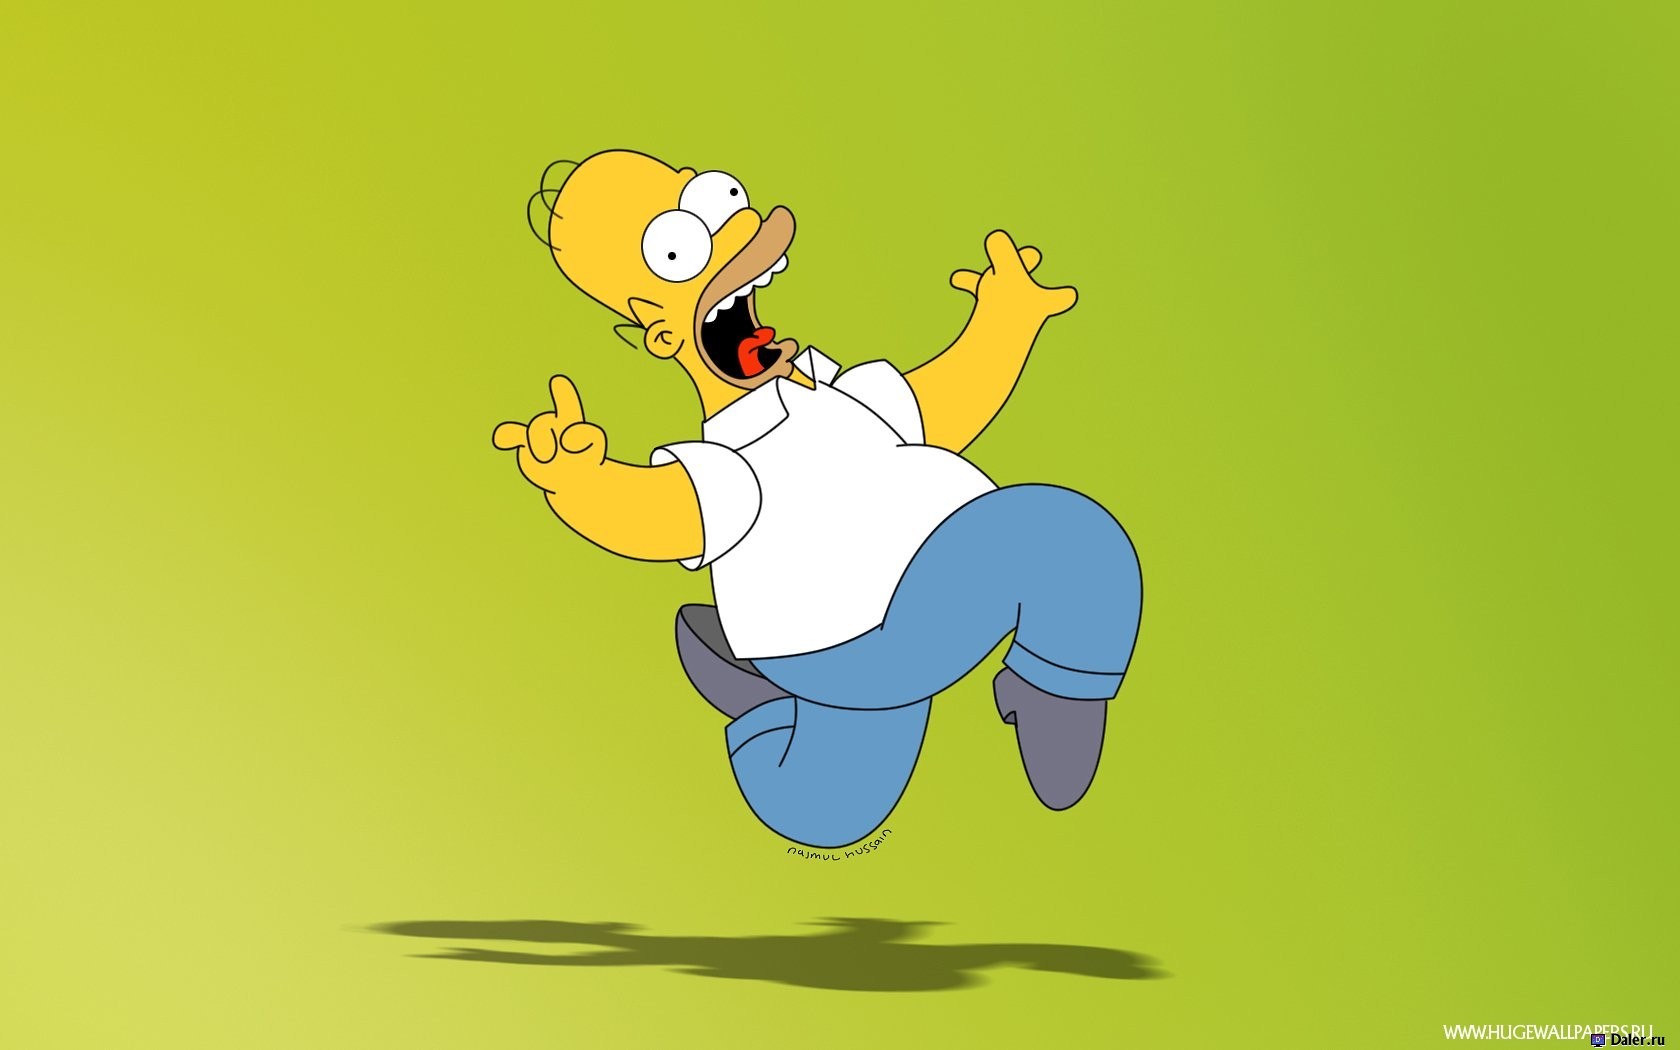 simpsons, funny, cartoon, homer simpson wallpaper for mobile